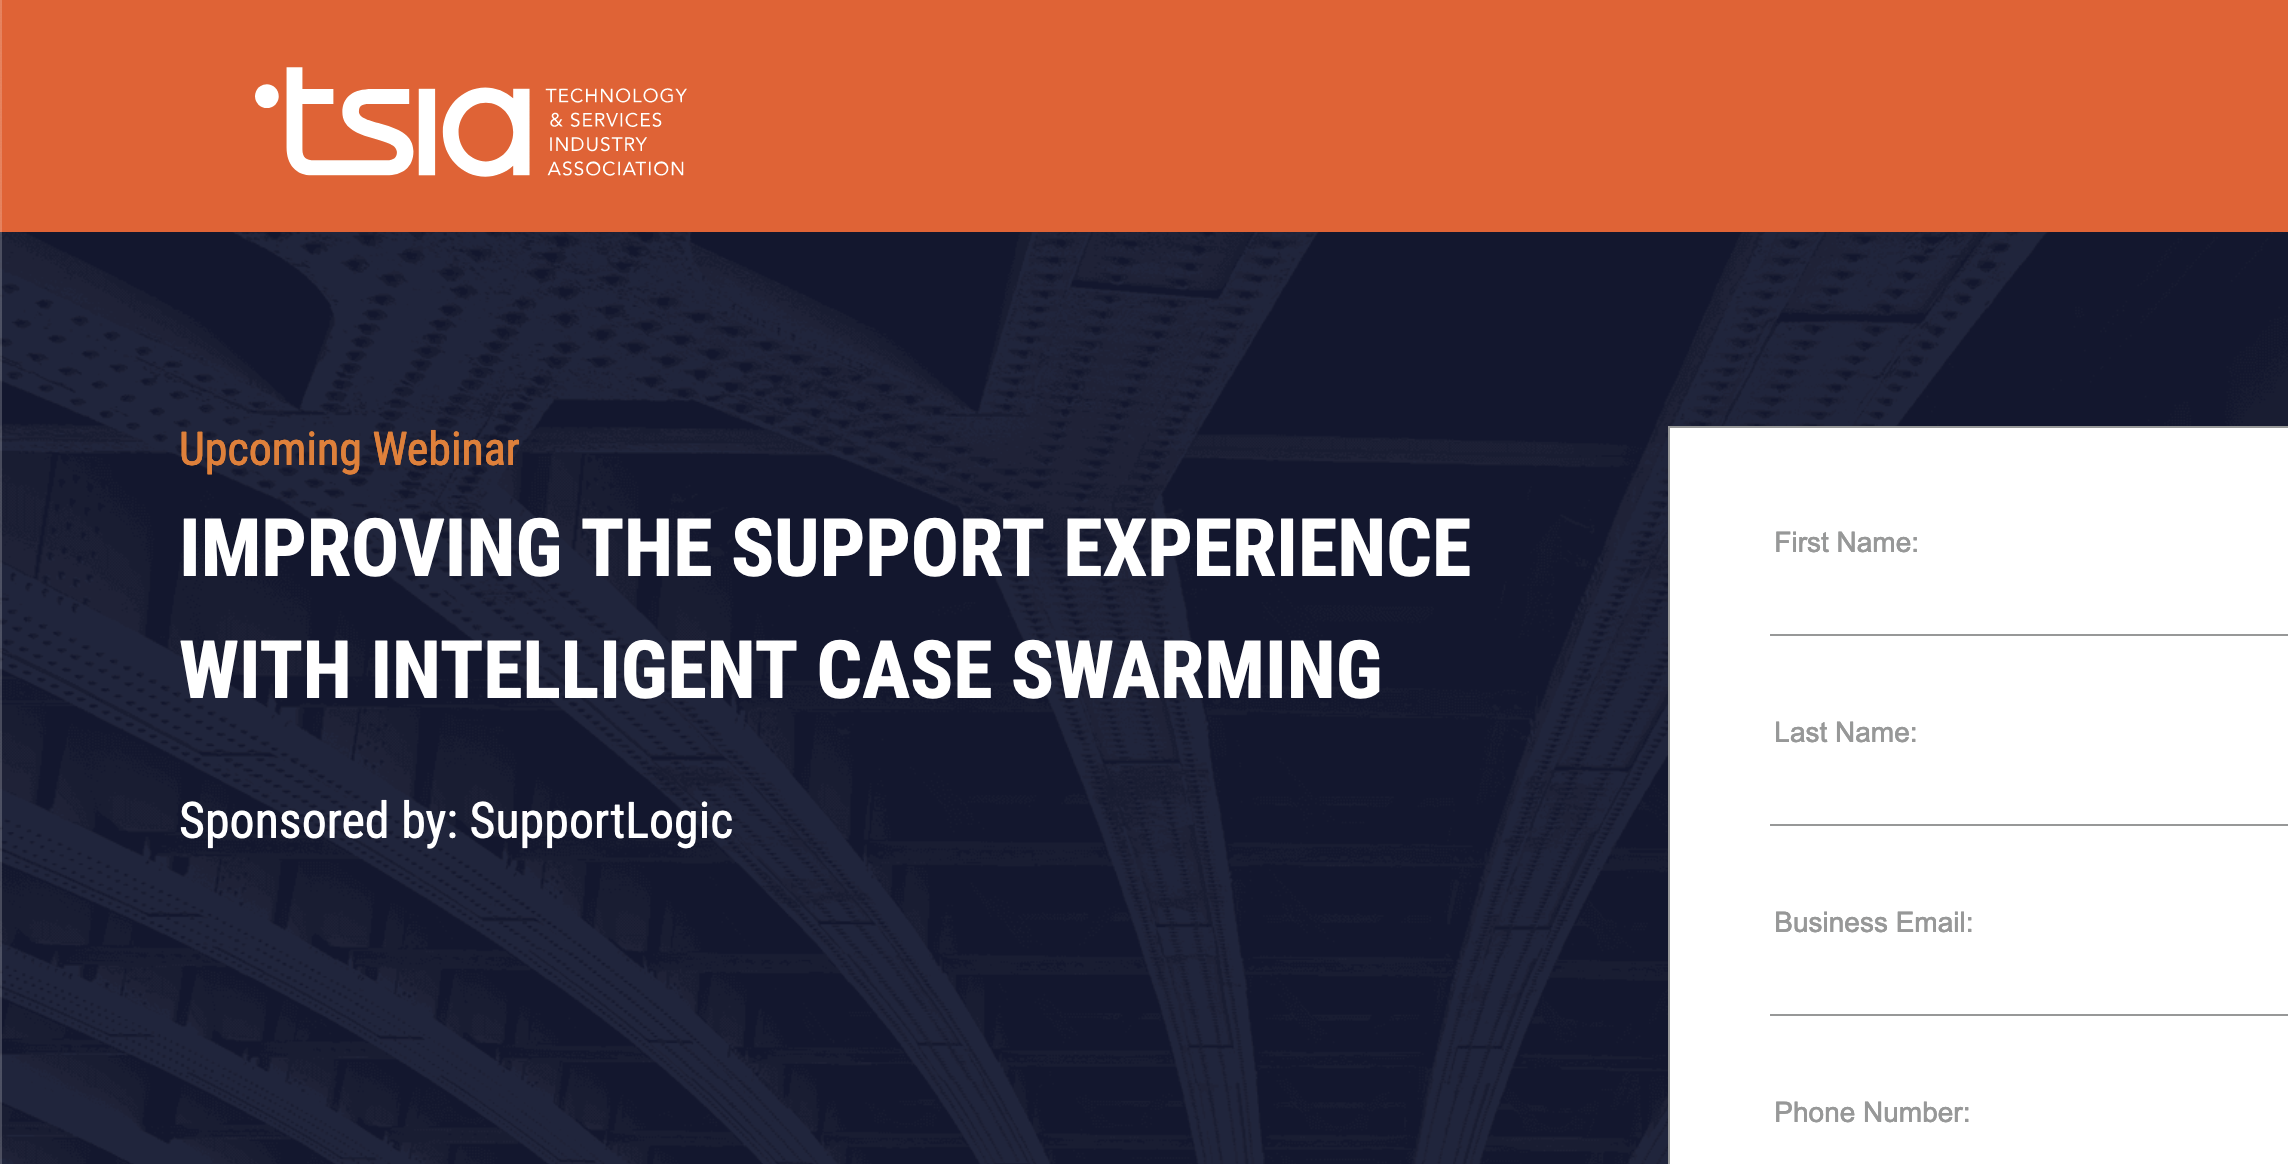 Improving the Support Experience with Intelligent Case Swarming